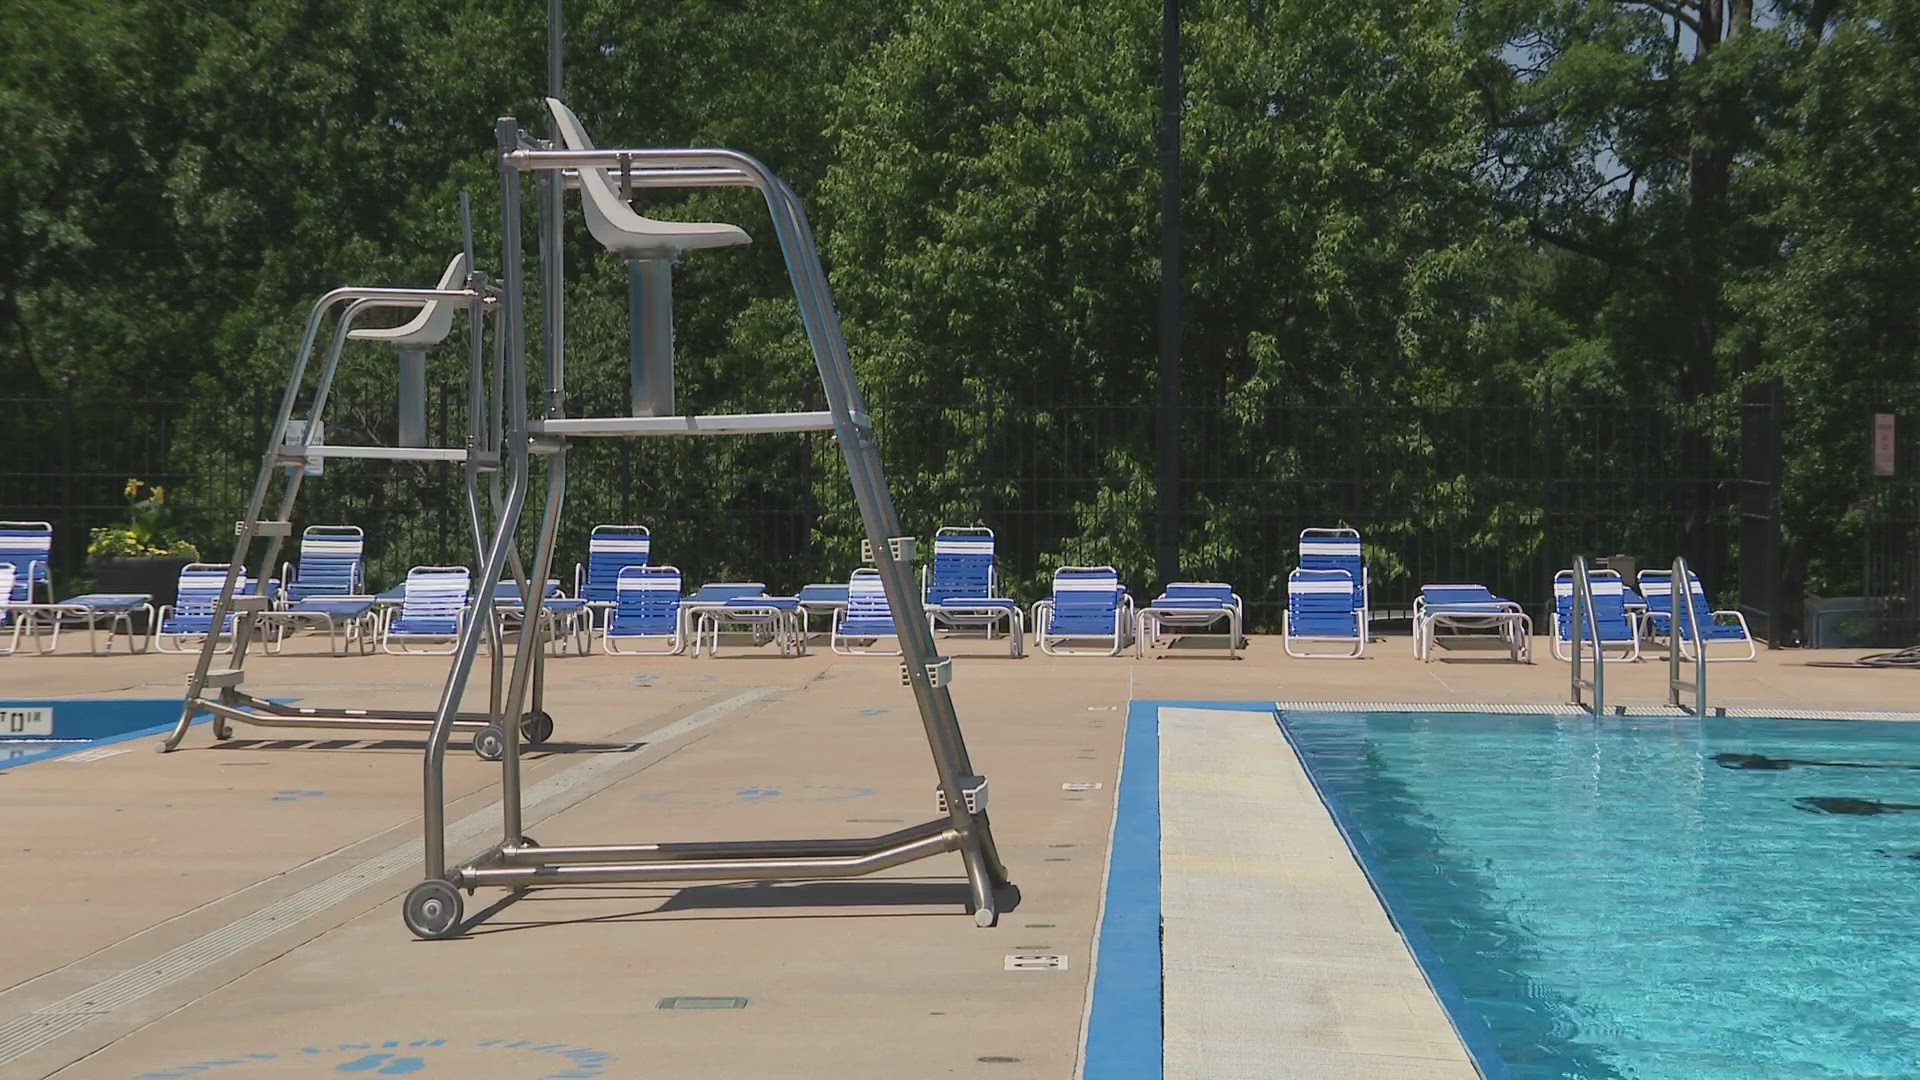 St. Louis-area pools are getting ready to open for Memorial Day. But it doesn’t come without challenges.